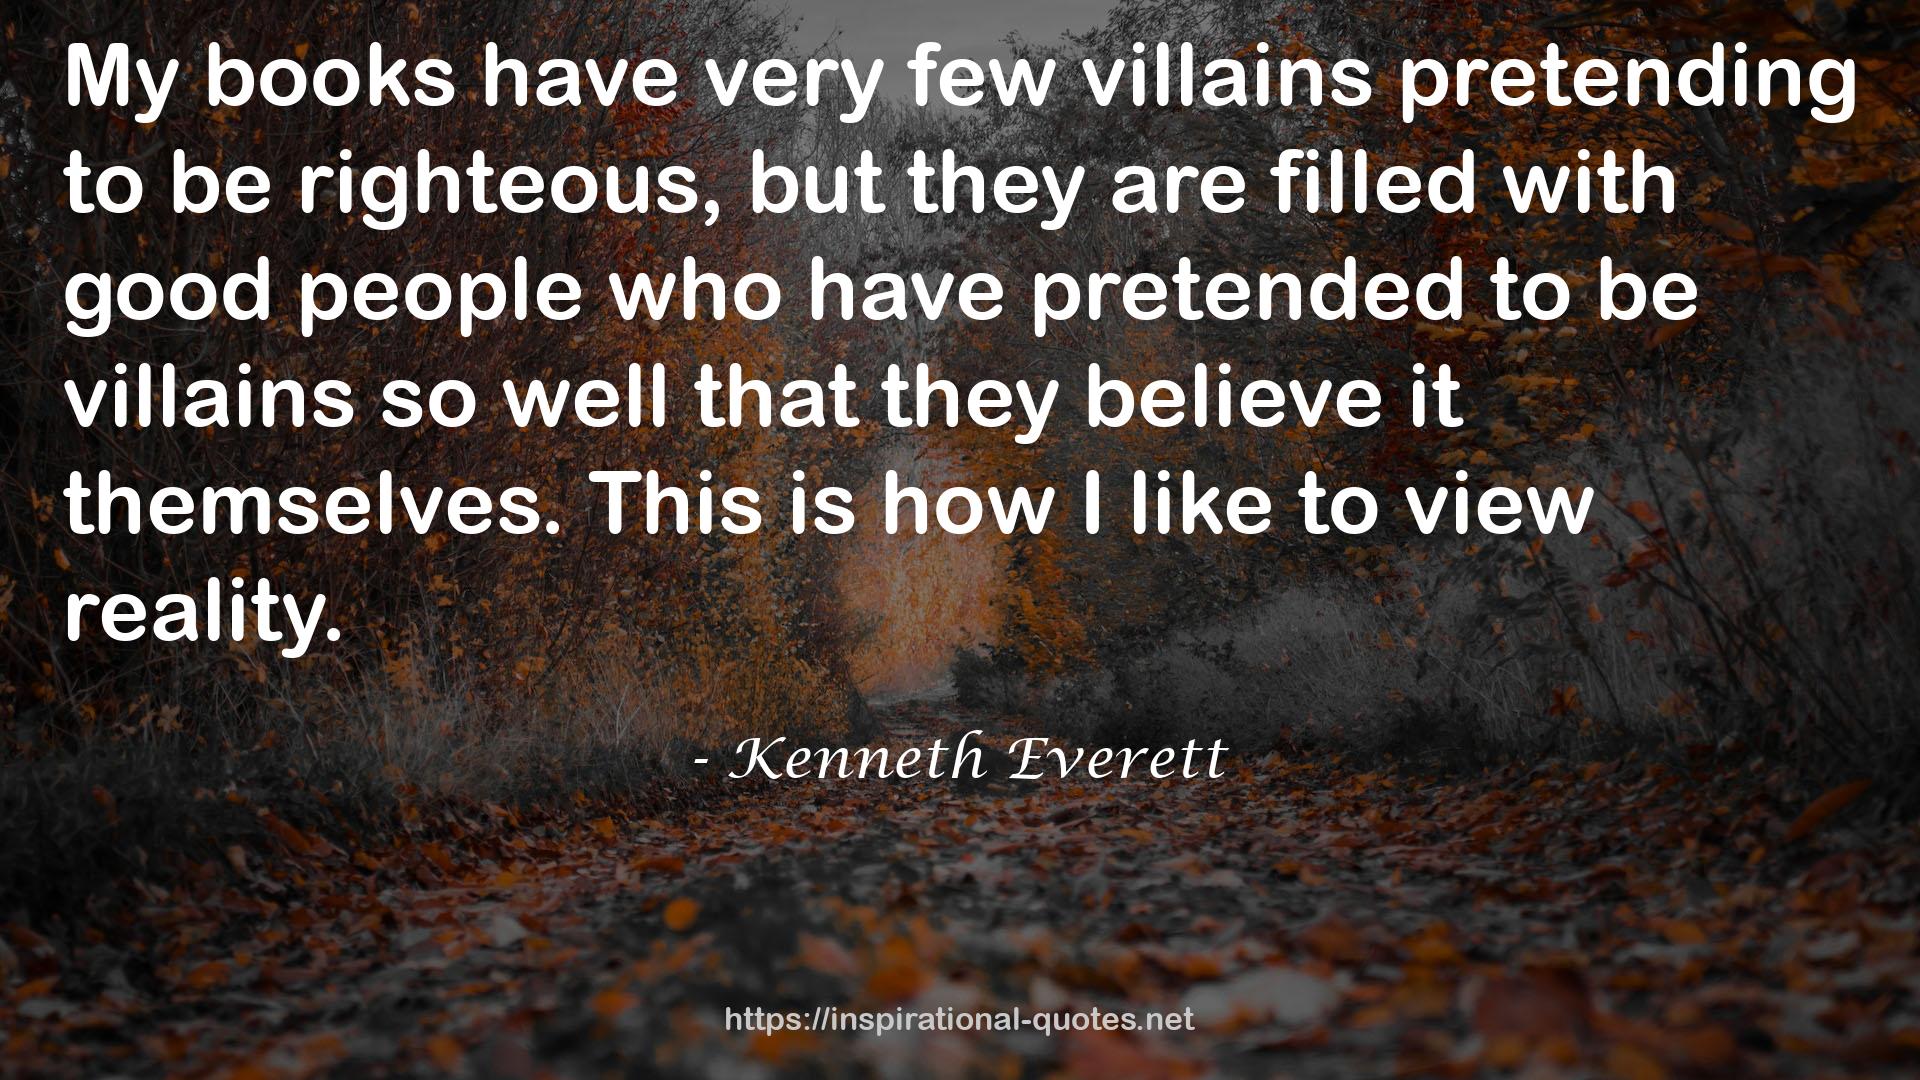 Kenneth Everett QUOTES